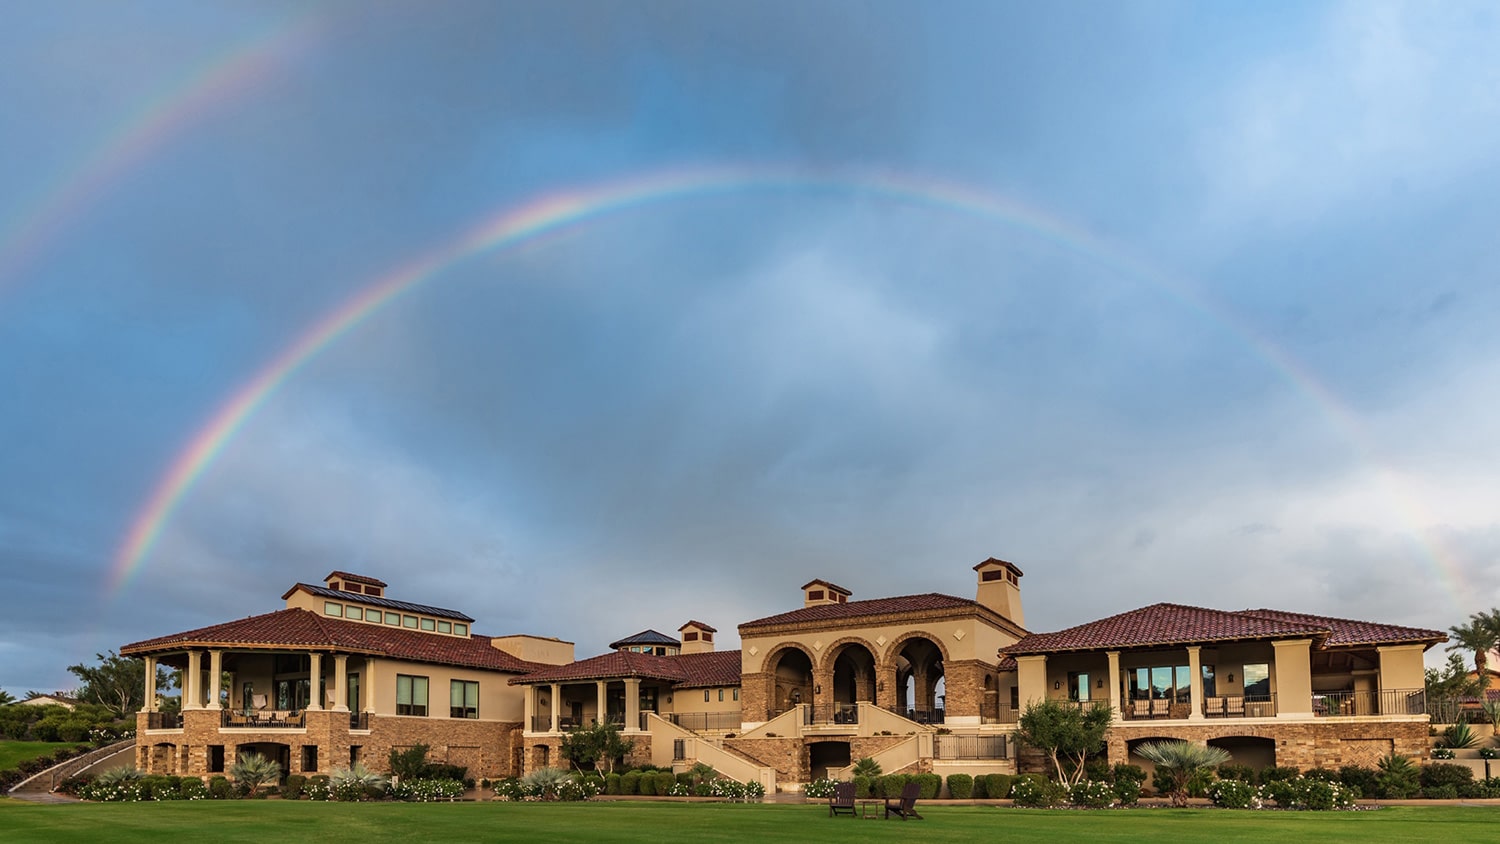 Andalusia rainbow over golf clubhouse